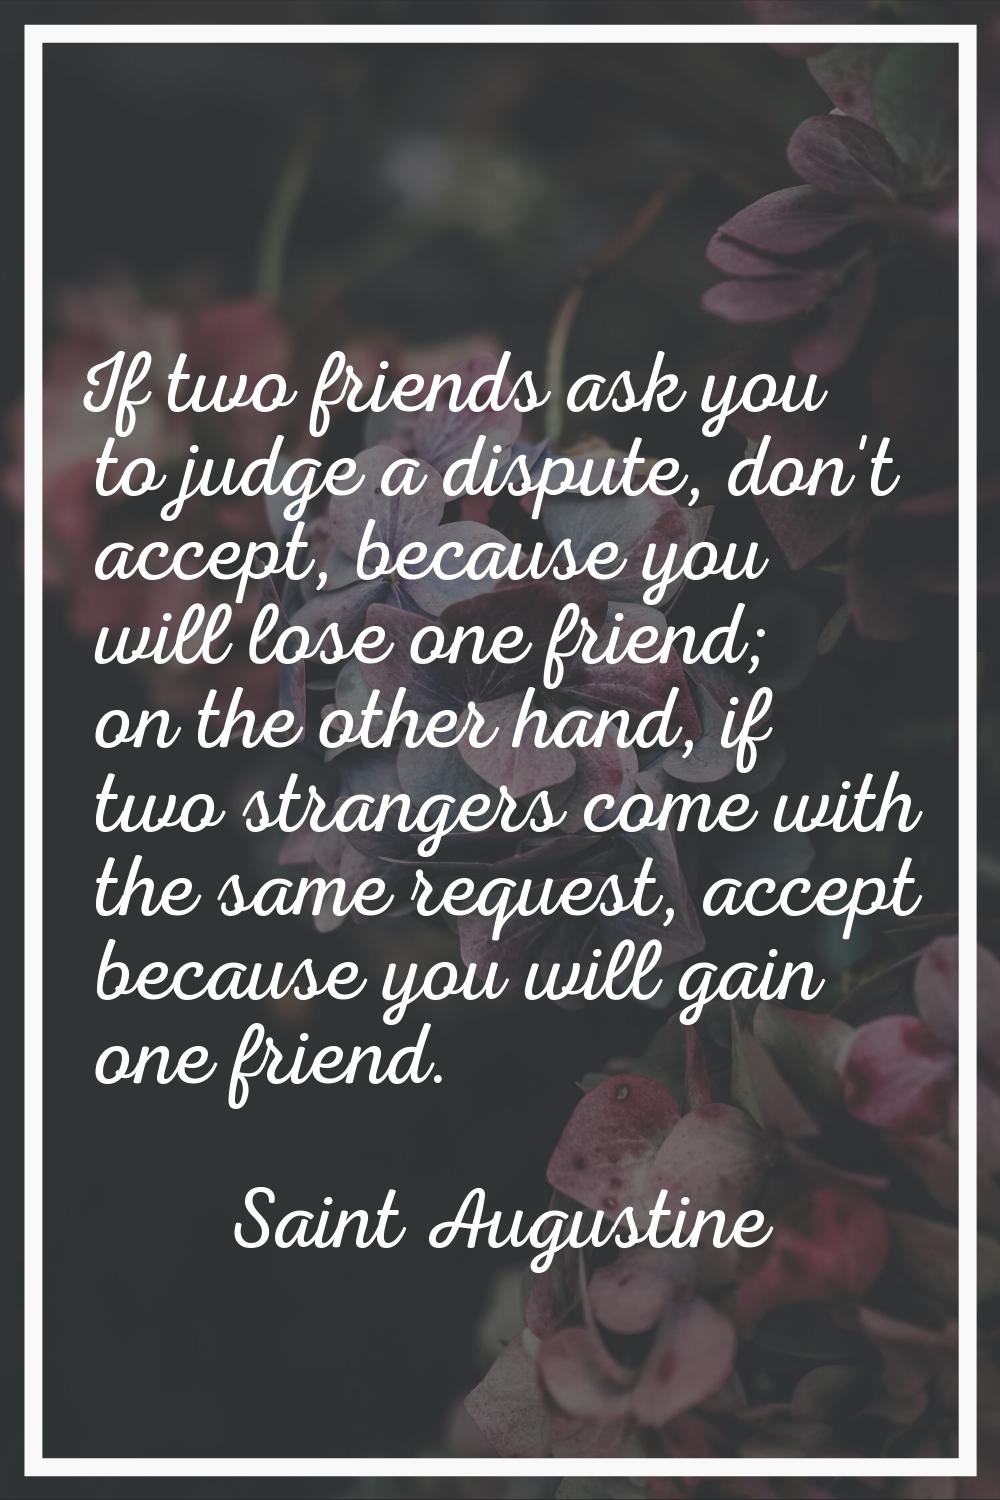 If two friends ask you to judge a dispute, don't accept, because you will lose one friend; on the o